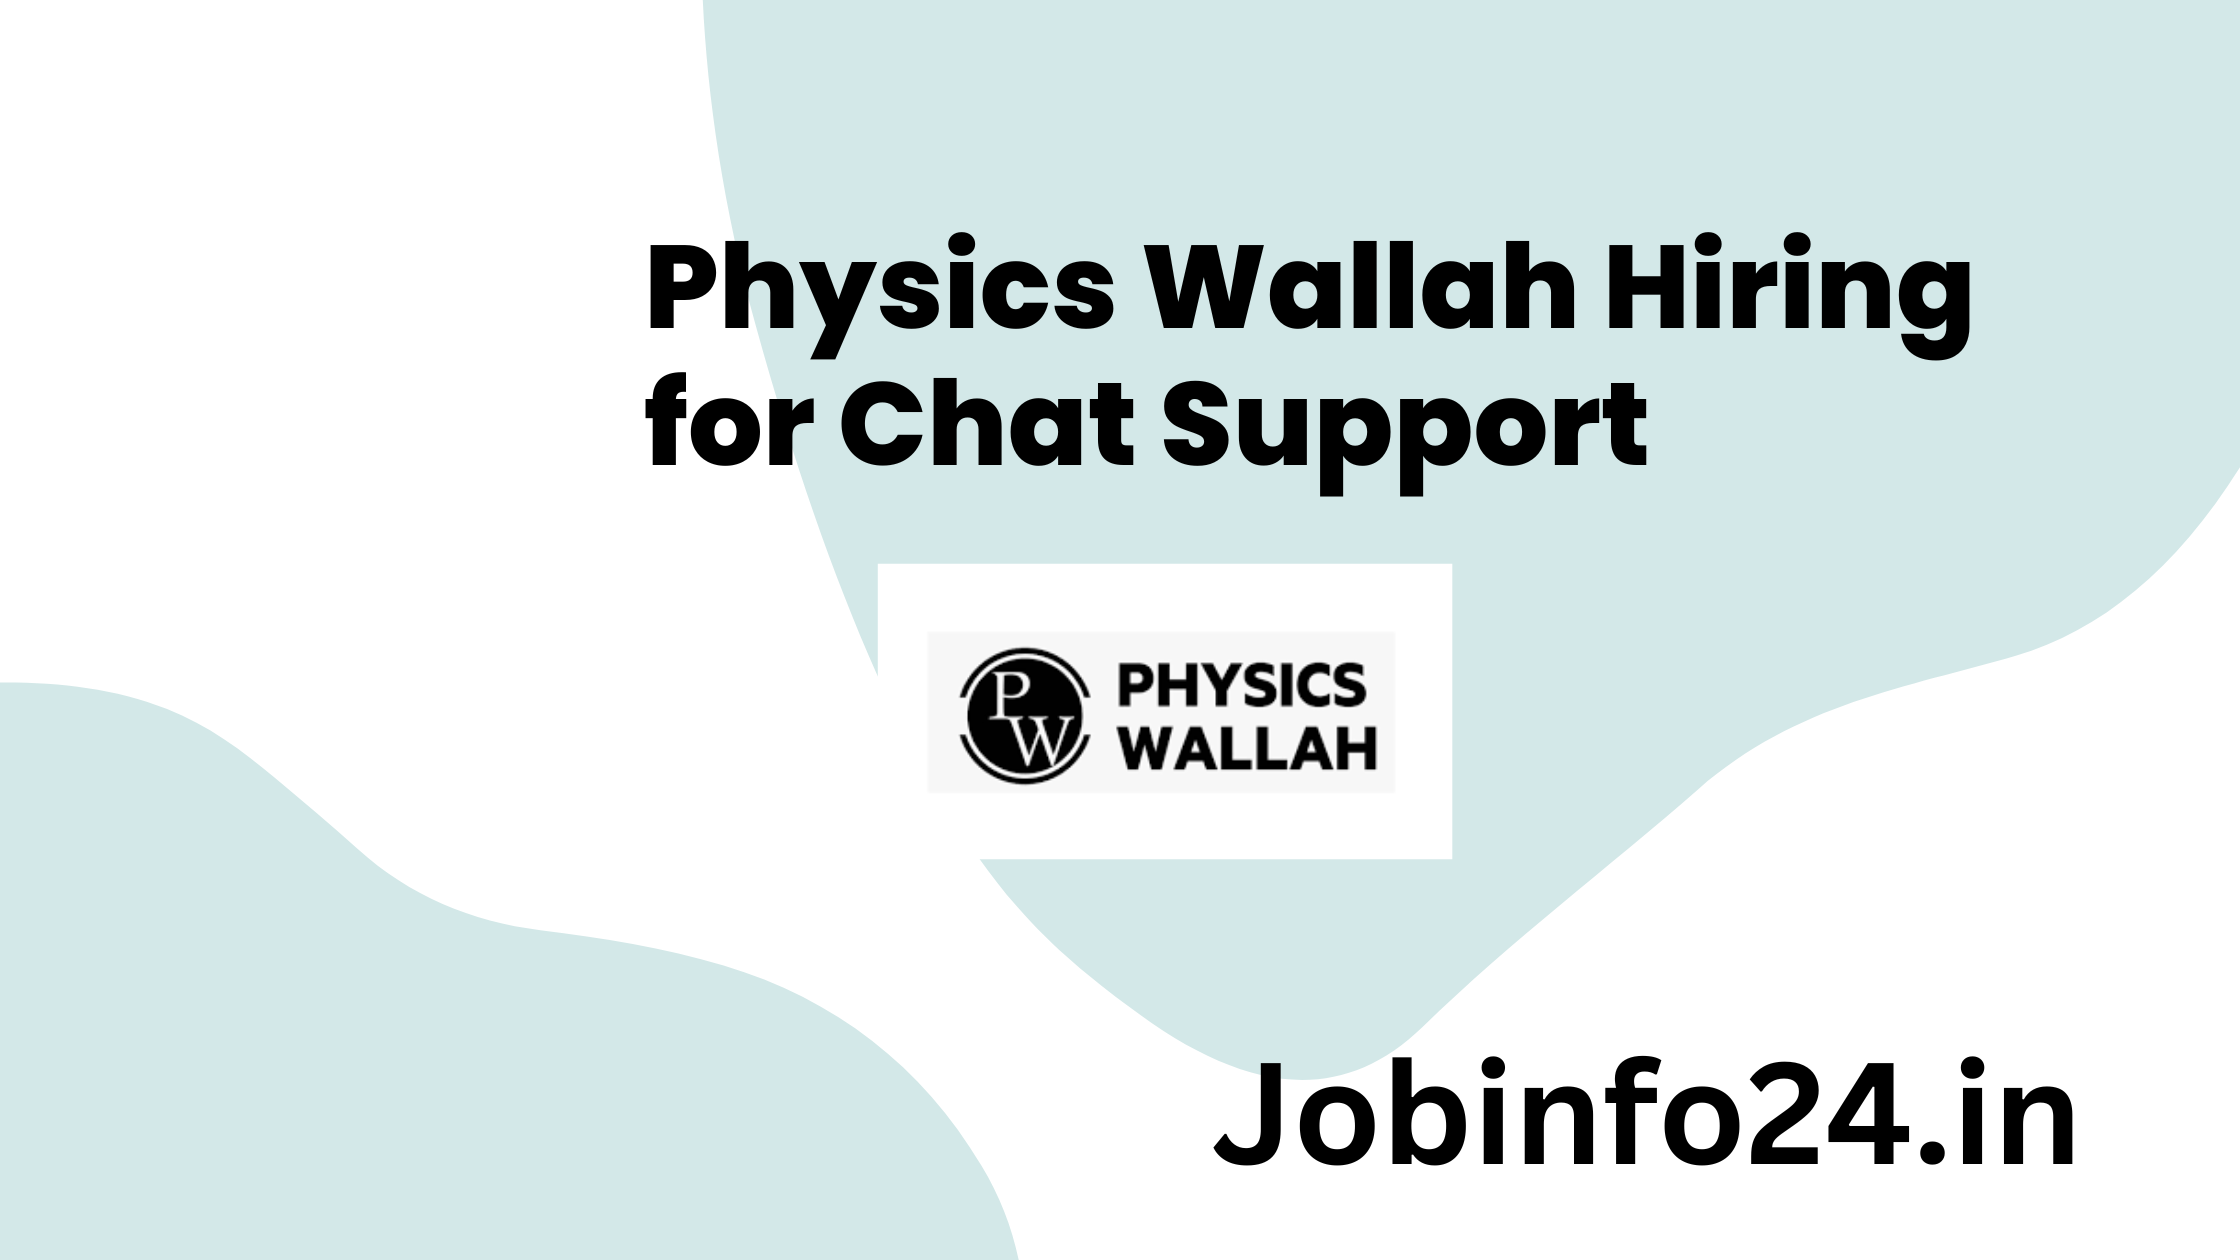 Physics Wallah Hiring for Chat Support